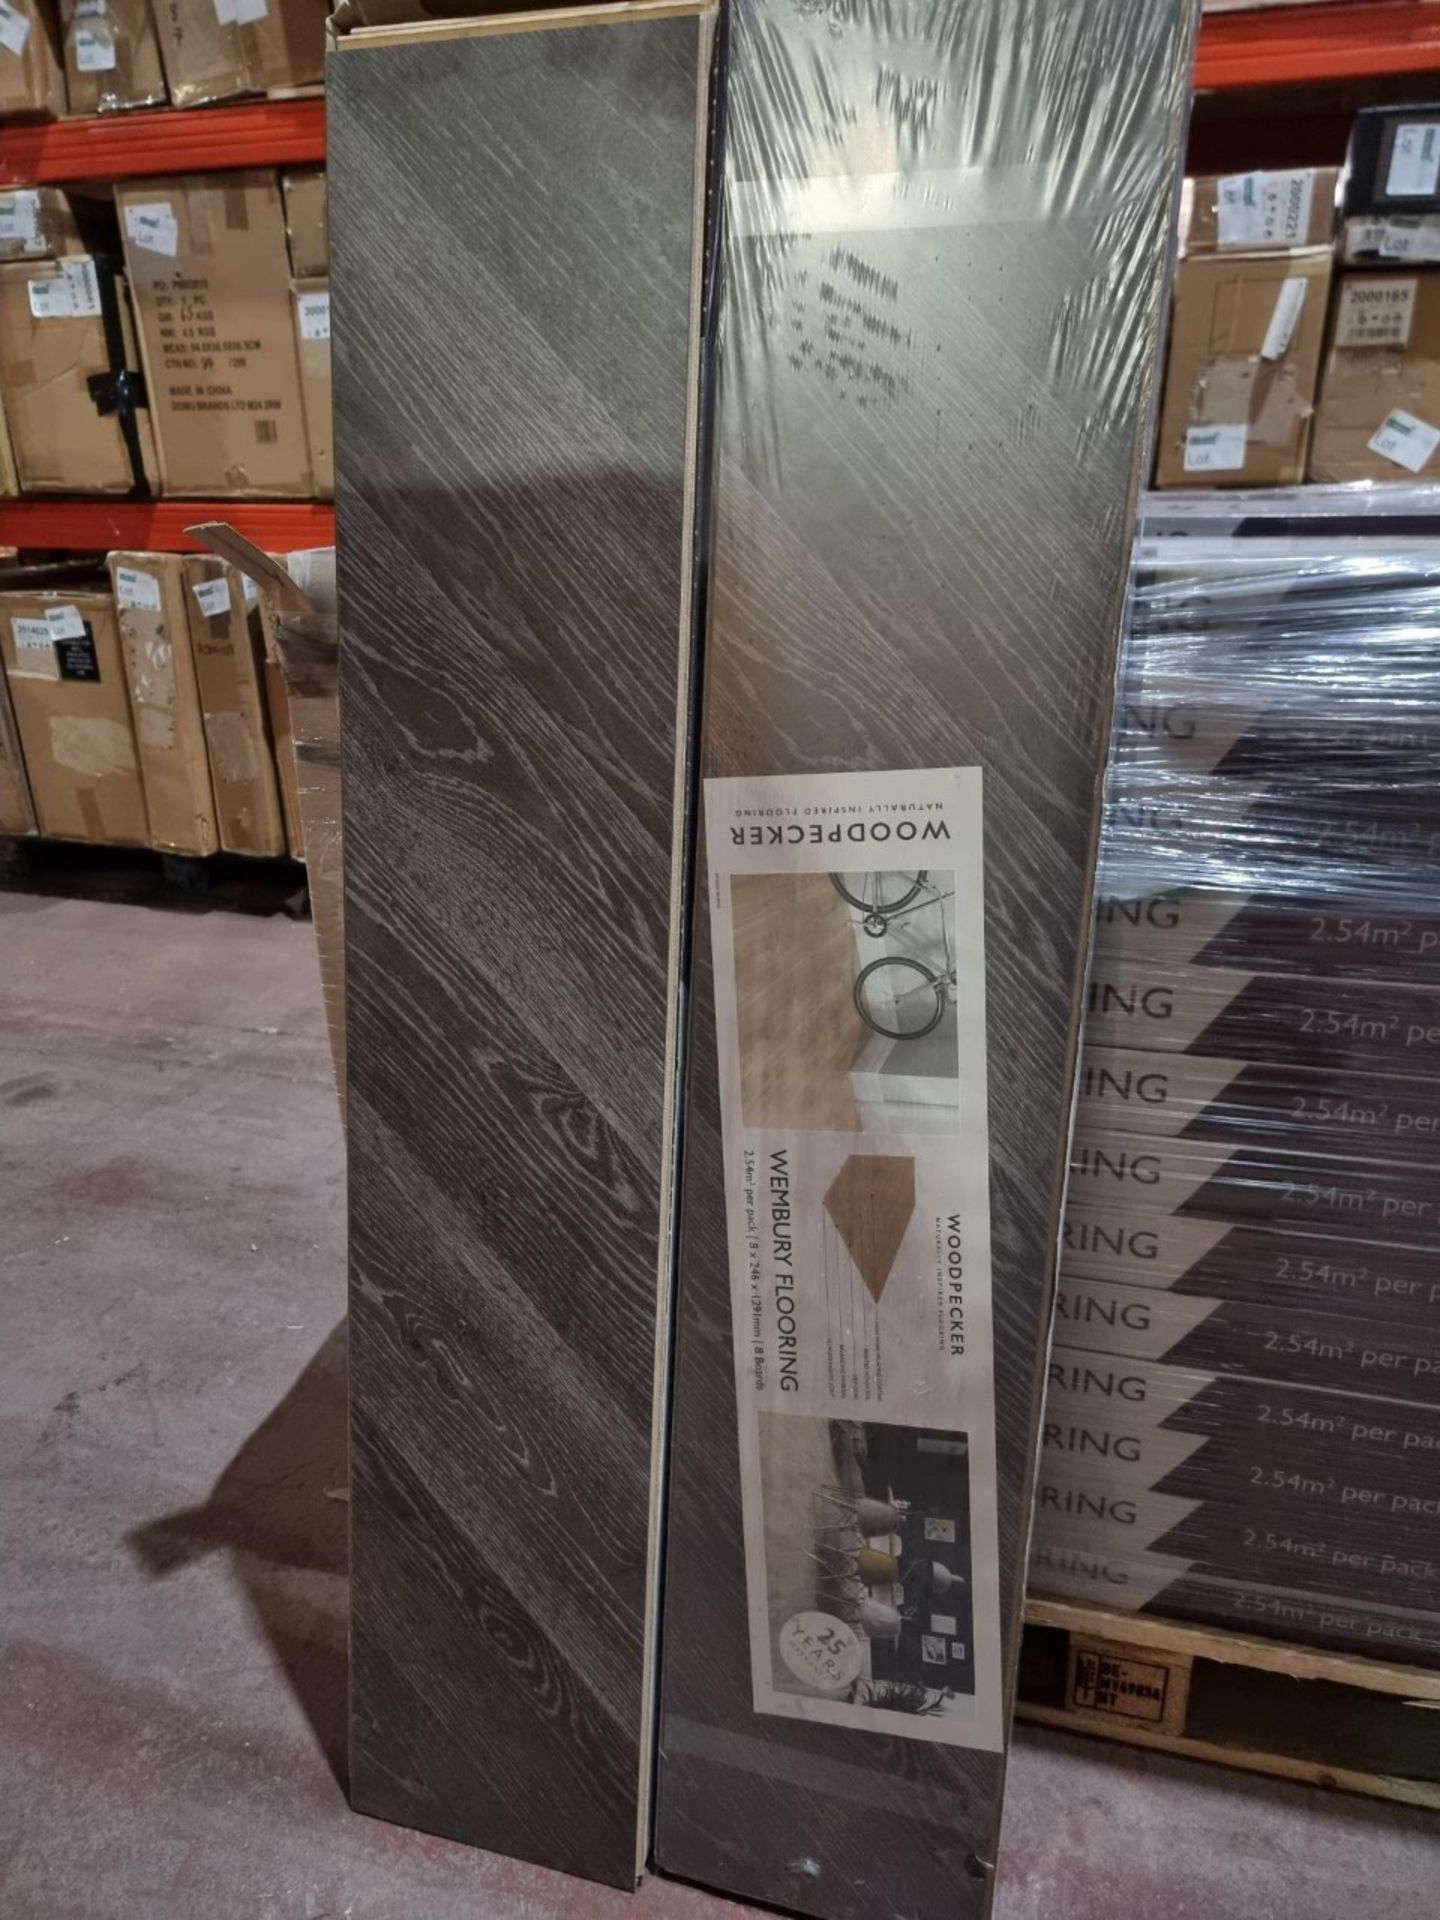 10 X NEW PACKS OF WEMBURY DUSTY OAK. LAMINATE FLOORING. 8MM. EACH PACK CONTAINS 2.54m2, GIVING